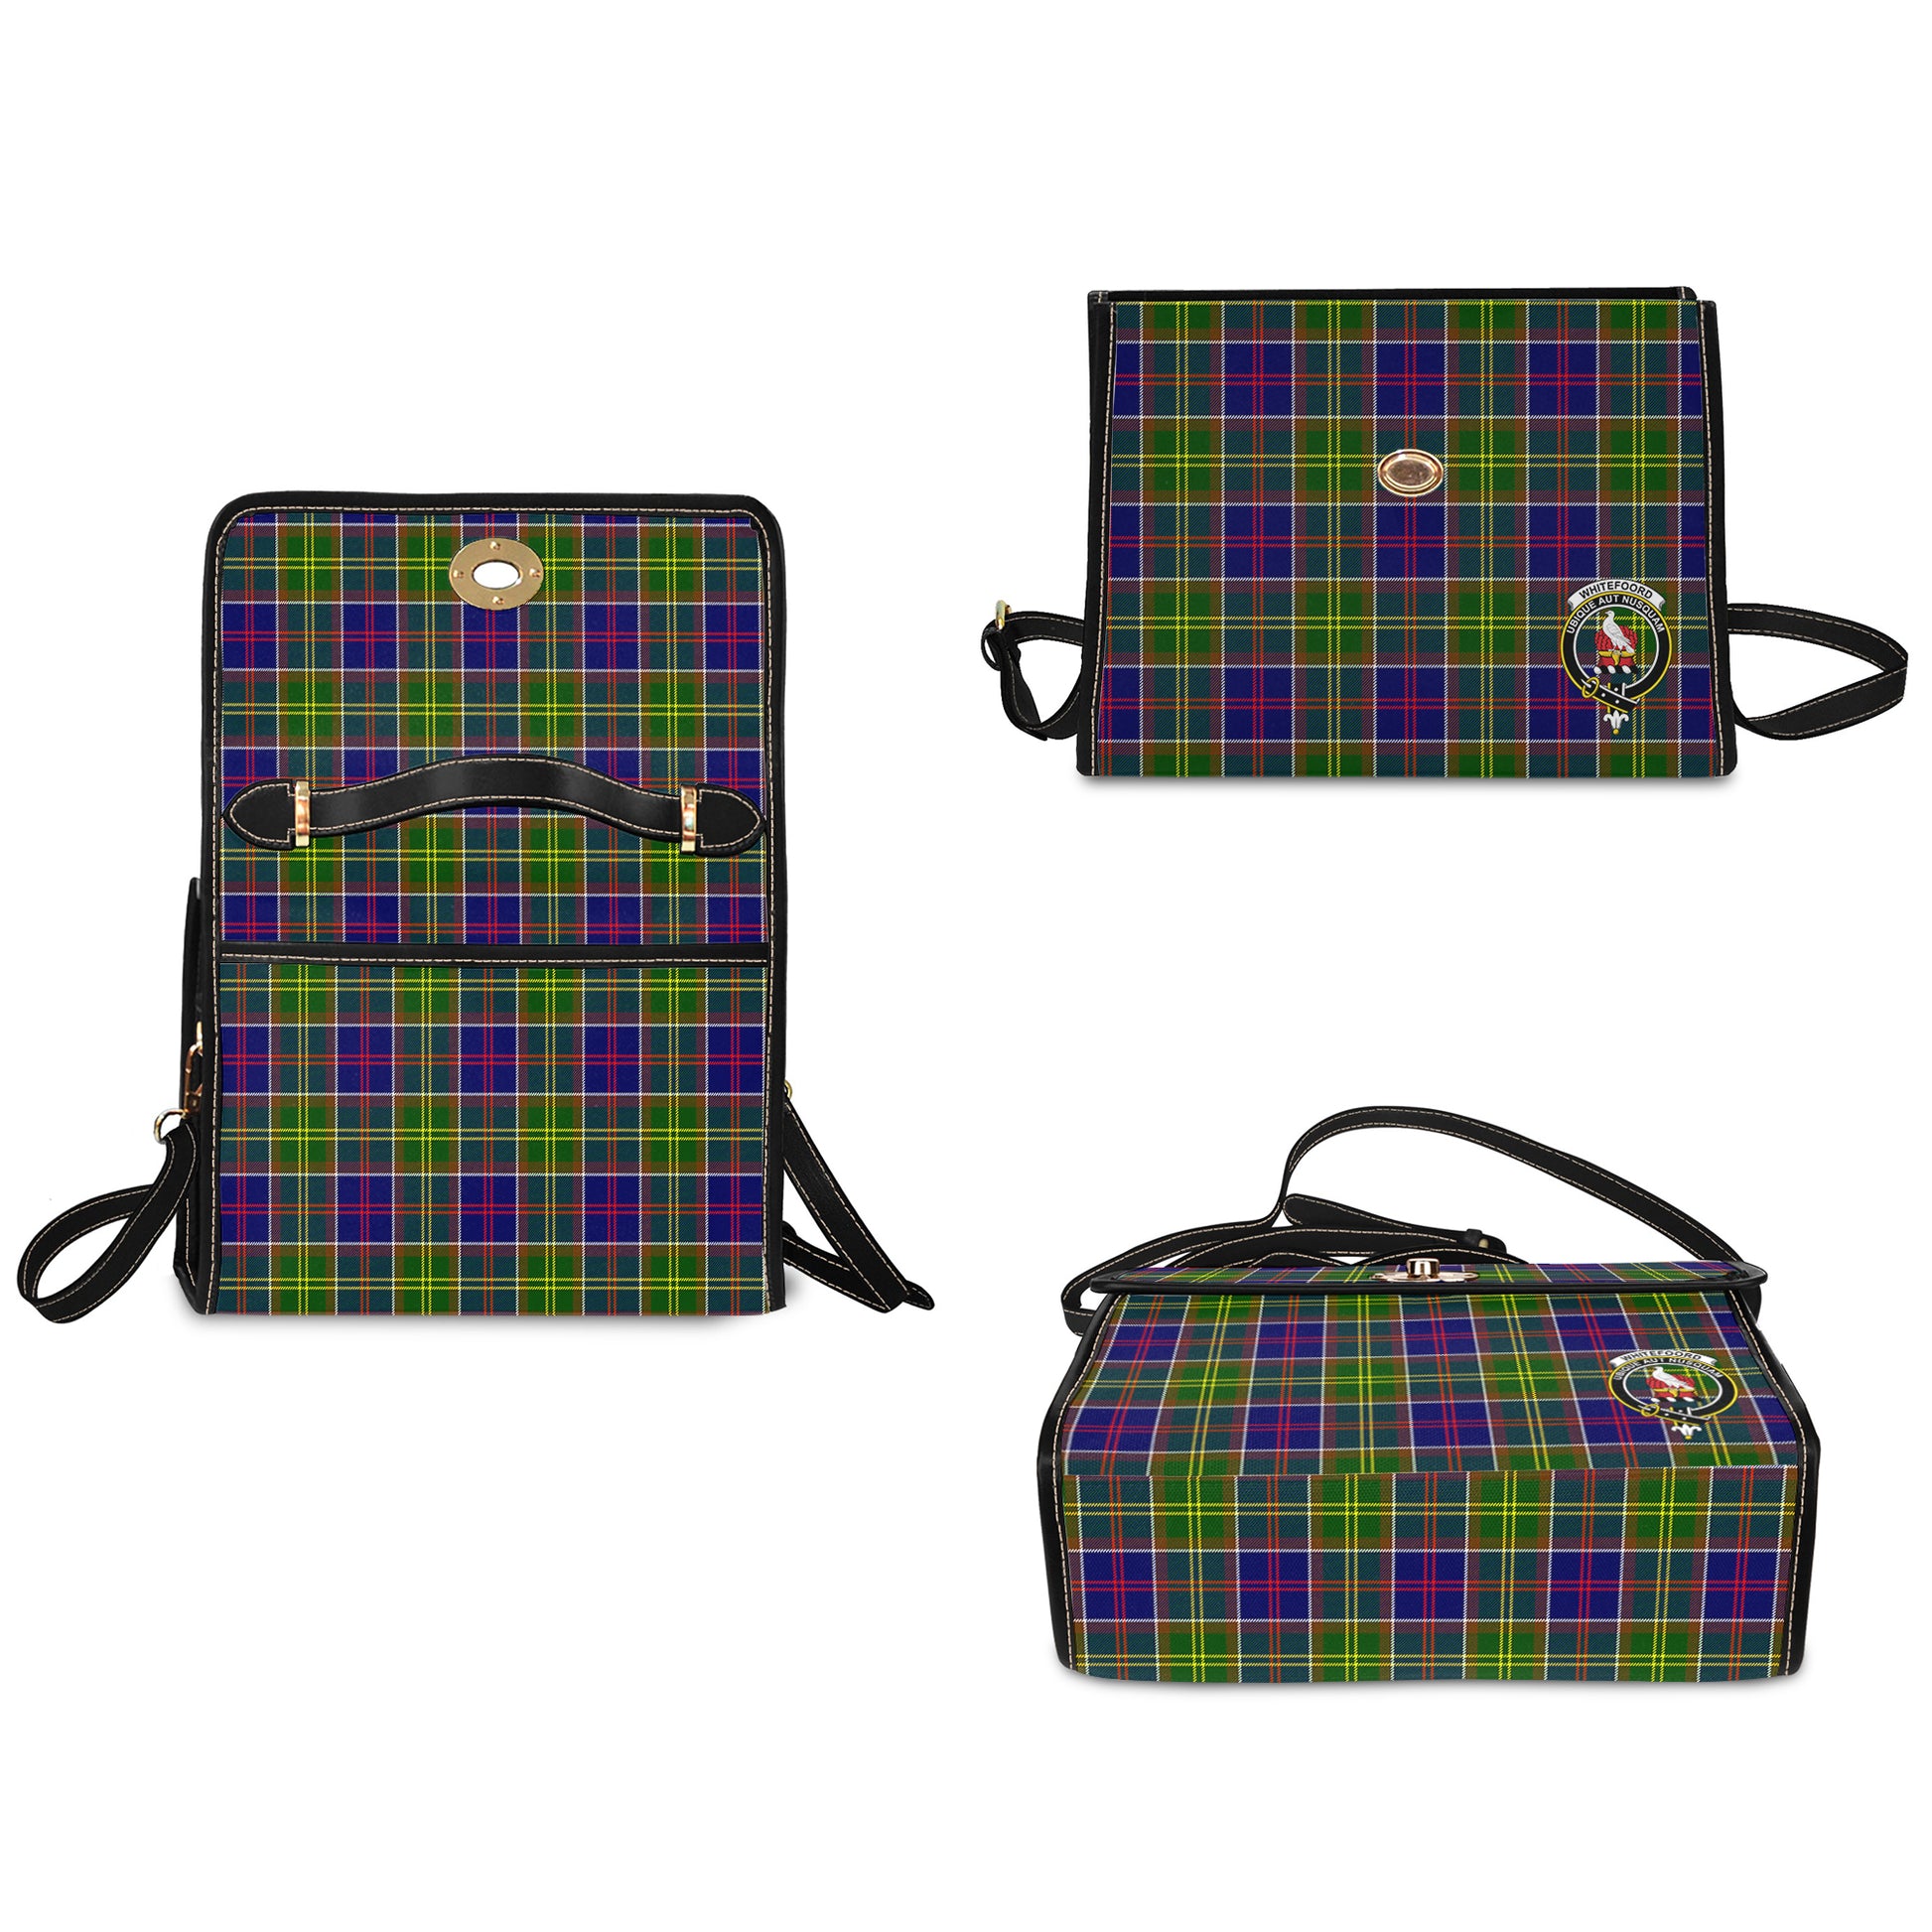 whitefoord-modern-tartan-leather-strap-waterproof-canvas-bag-with-family-crest